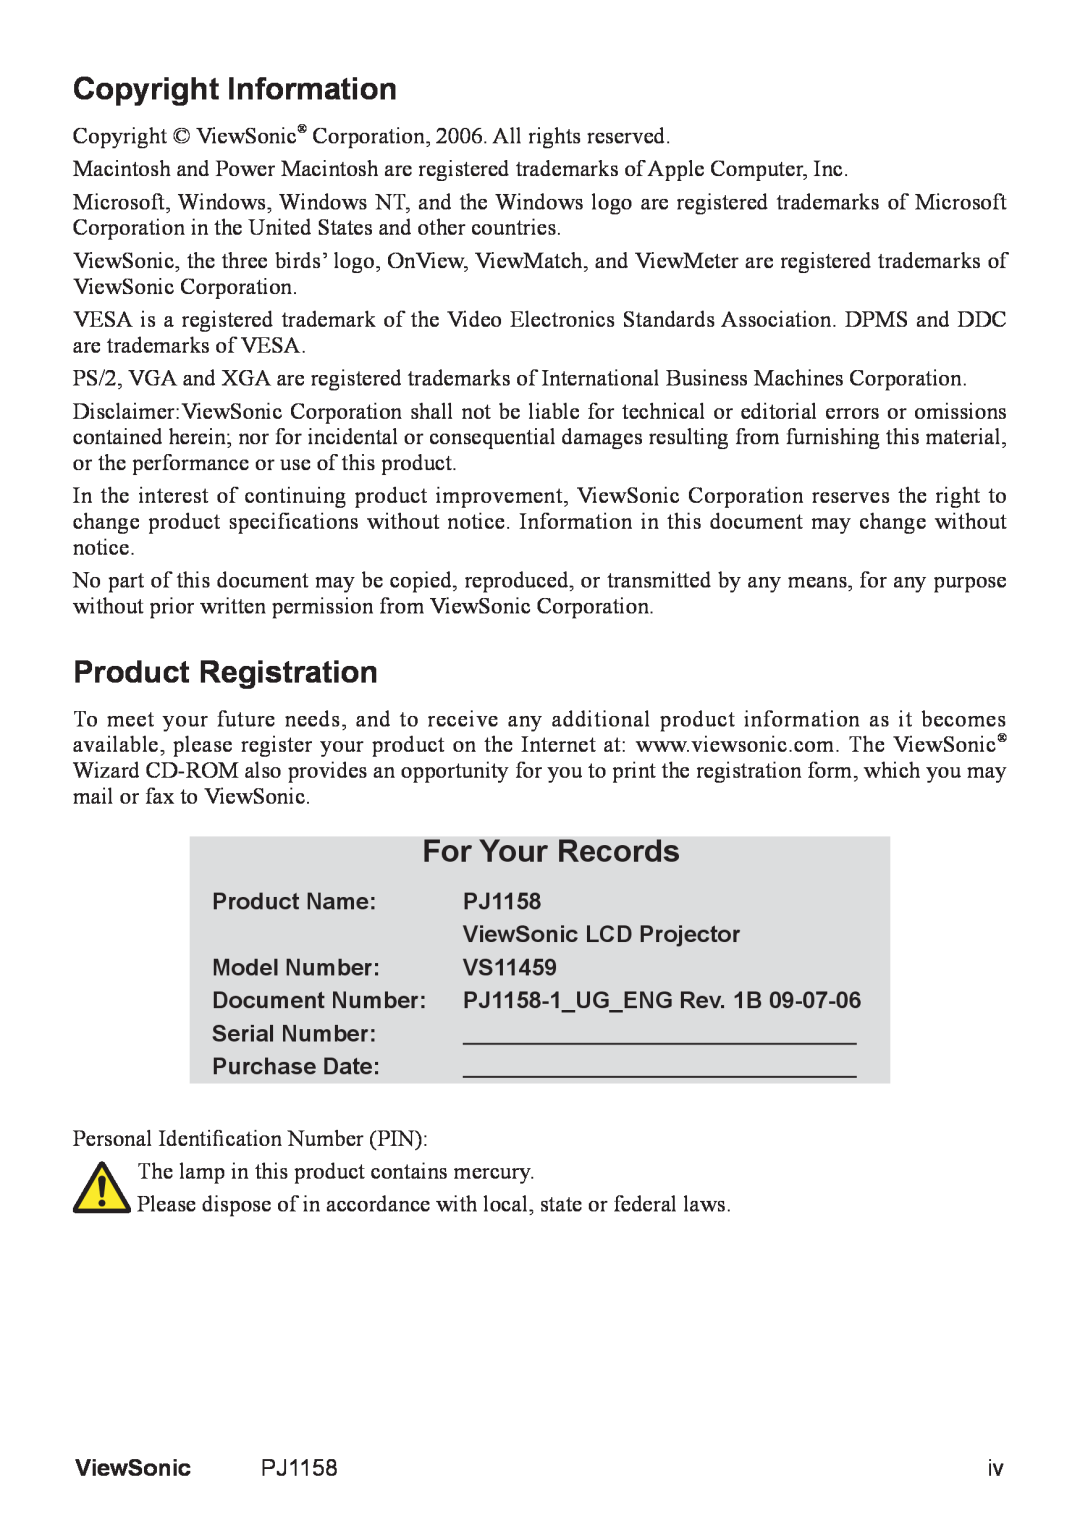 ViewSonic PJ1158 manual Copyright Information, Product Registration, For Your Records 